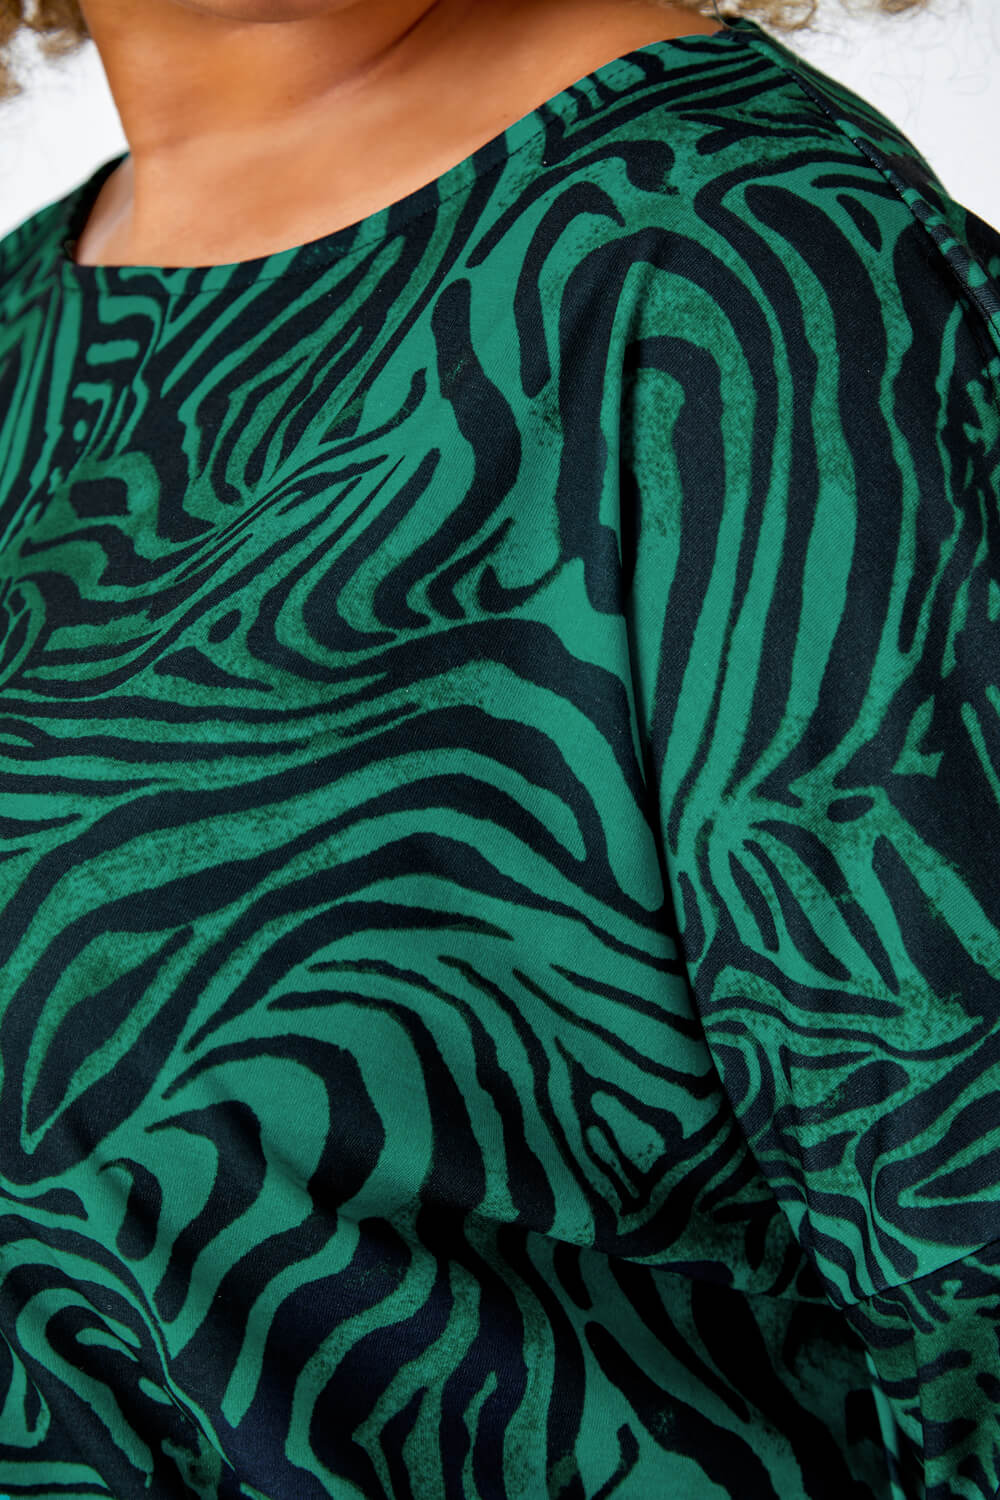 Green Curve Animal Print Blouson Stretch Top, Image 5 of 5